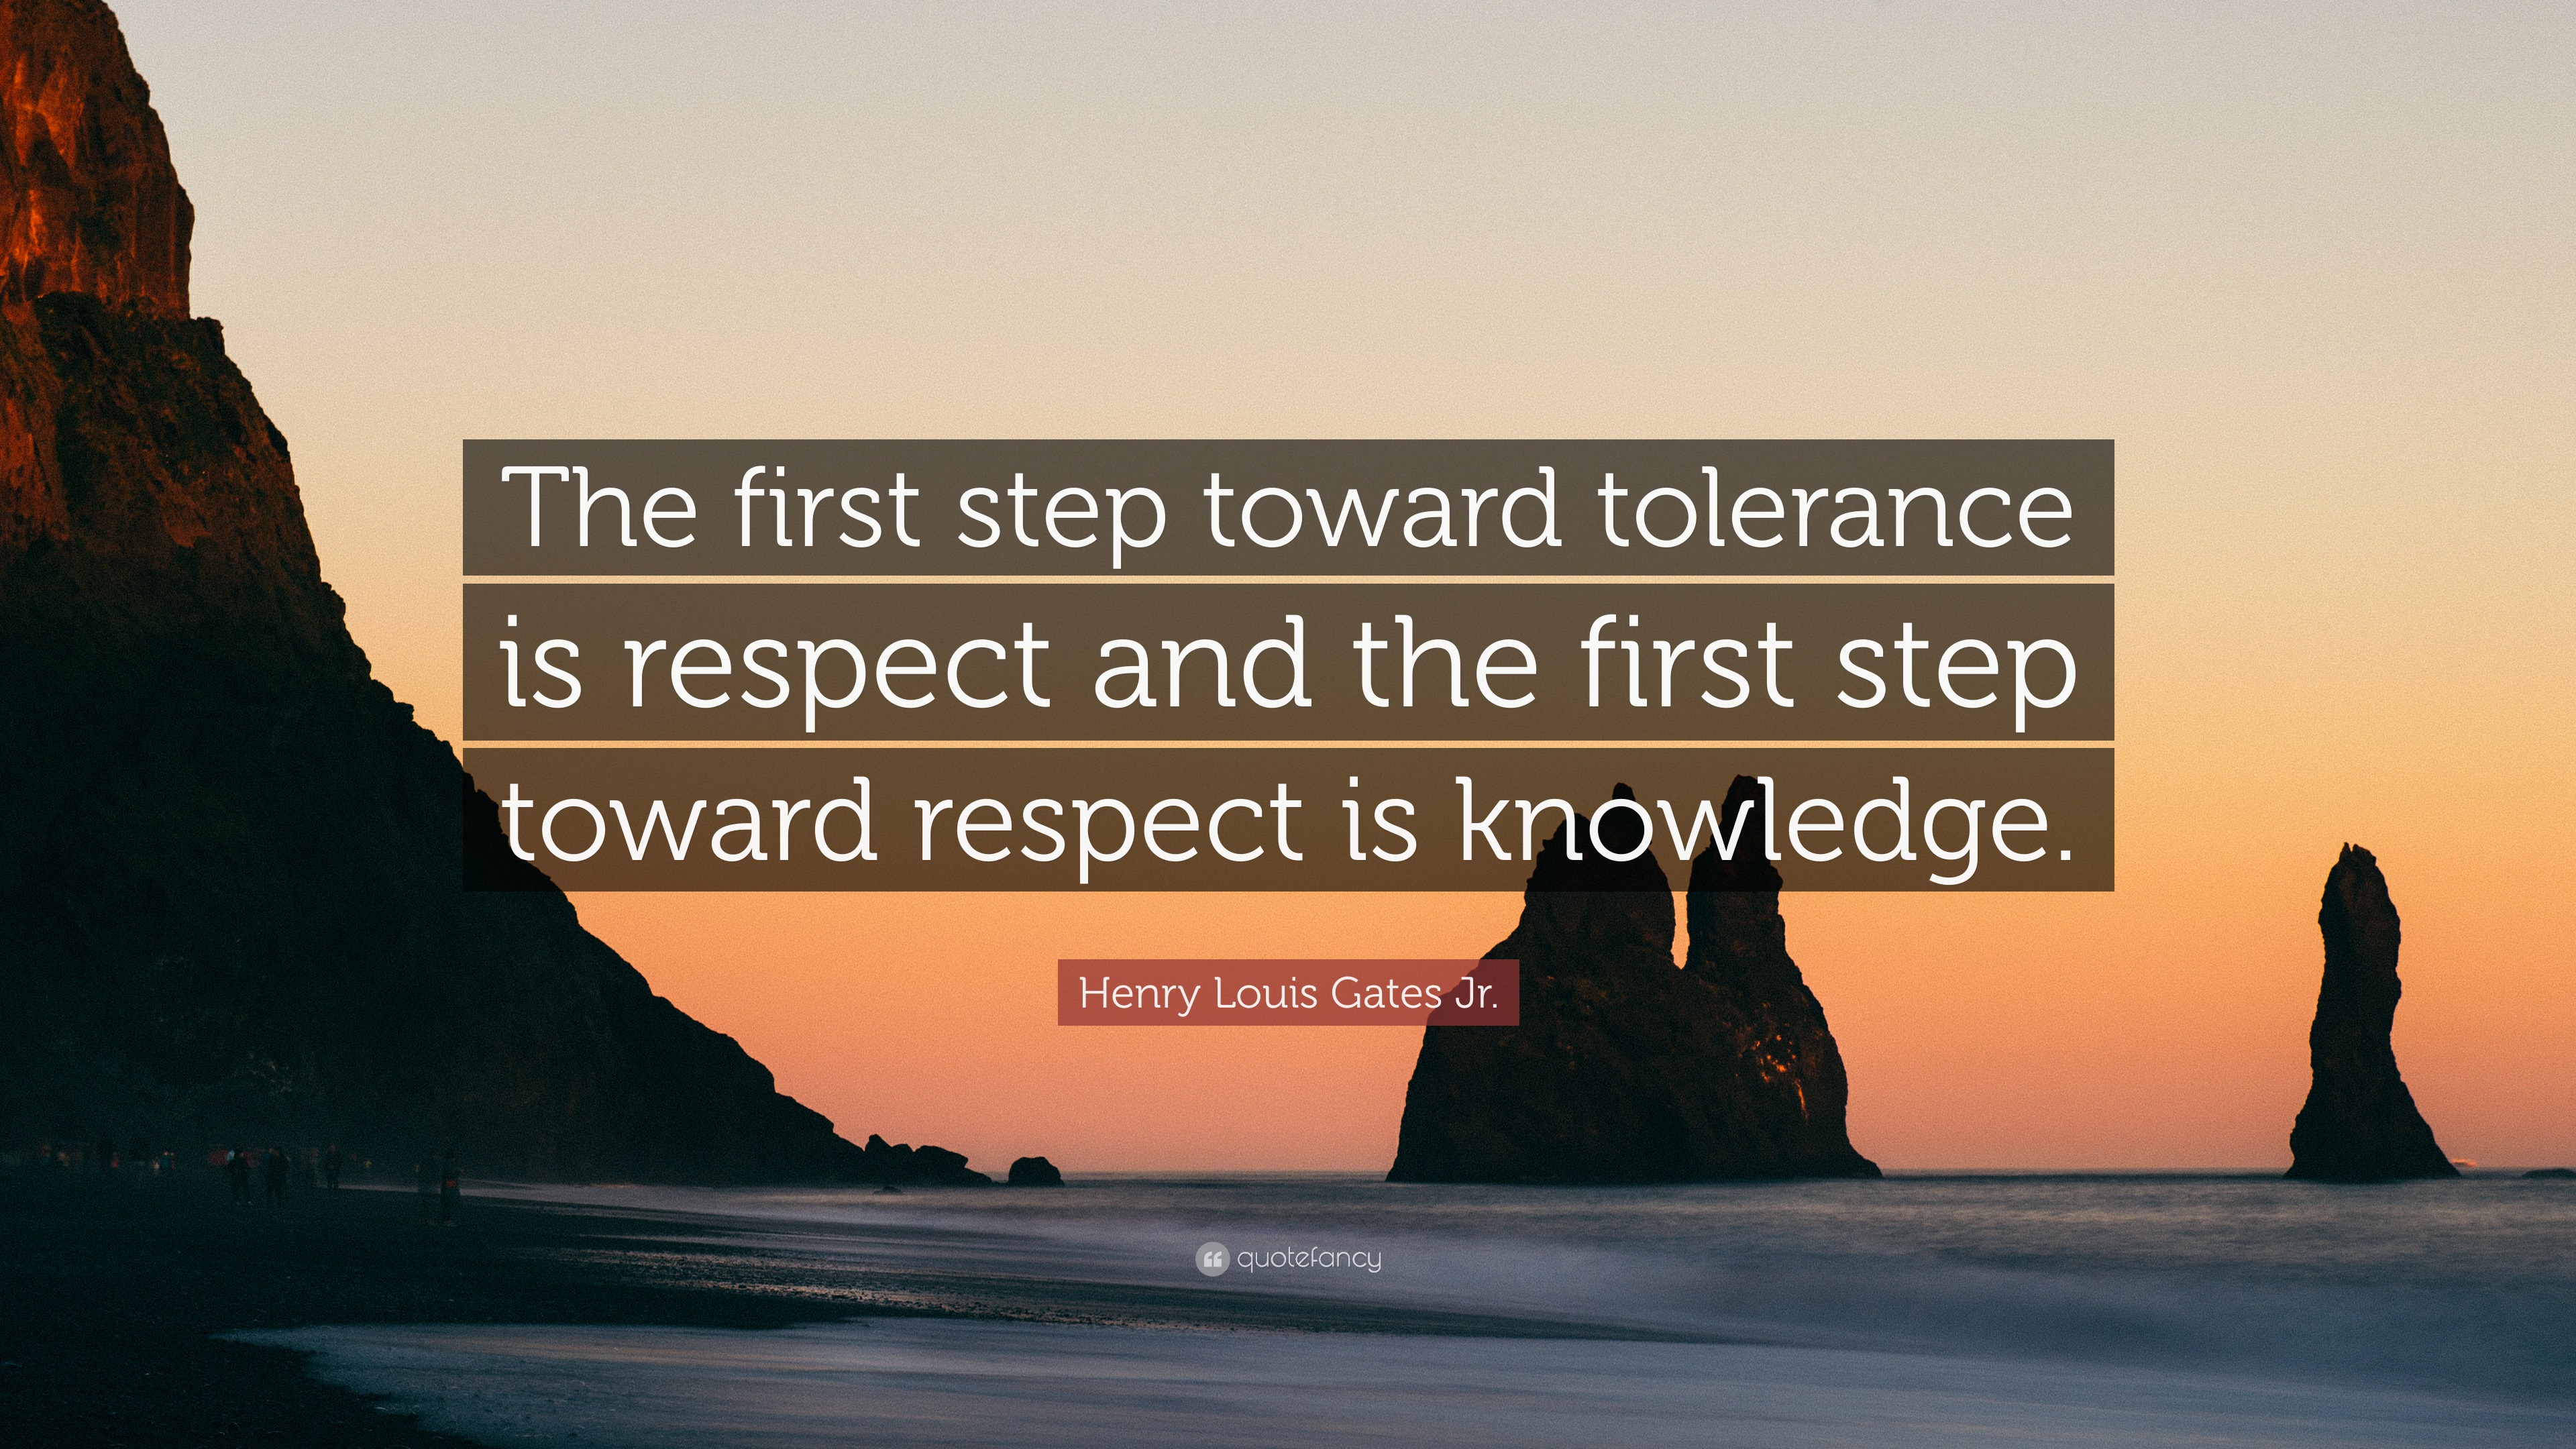 tolerance and respect